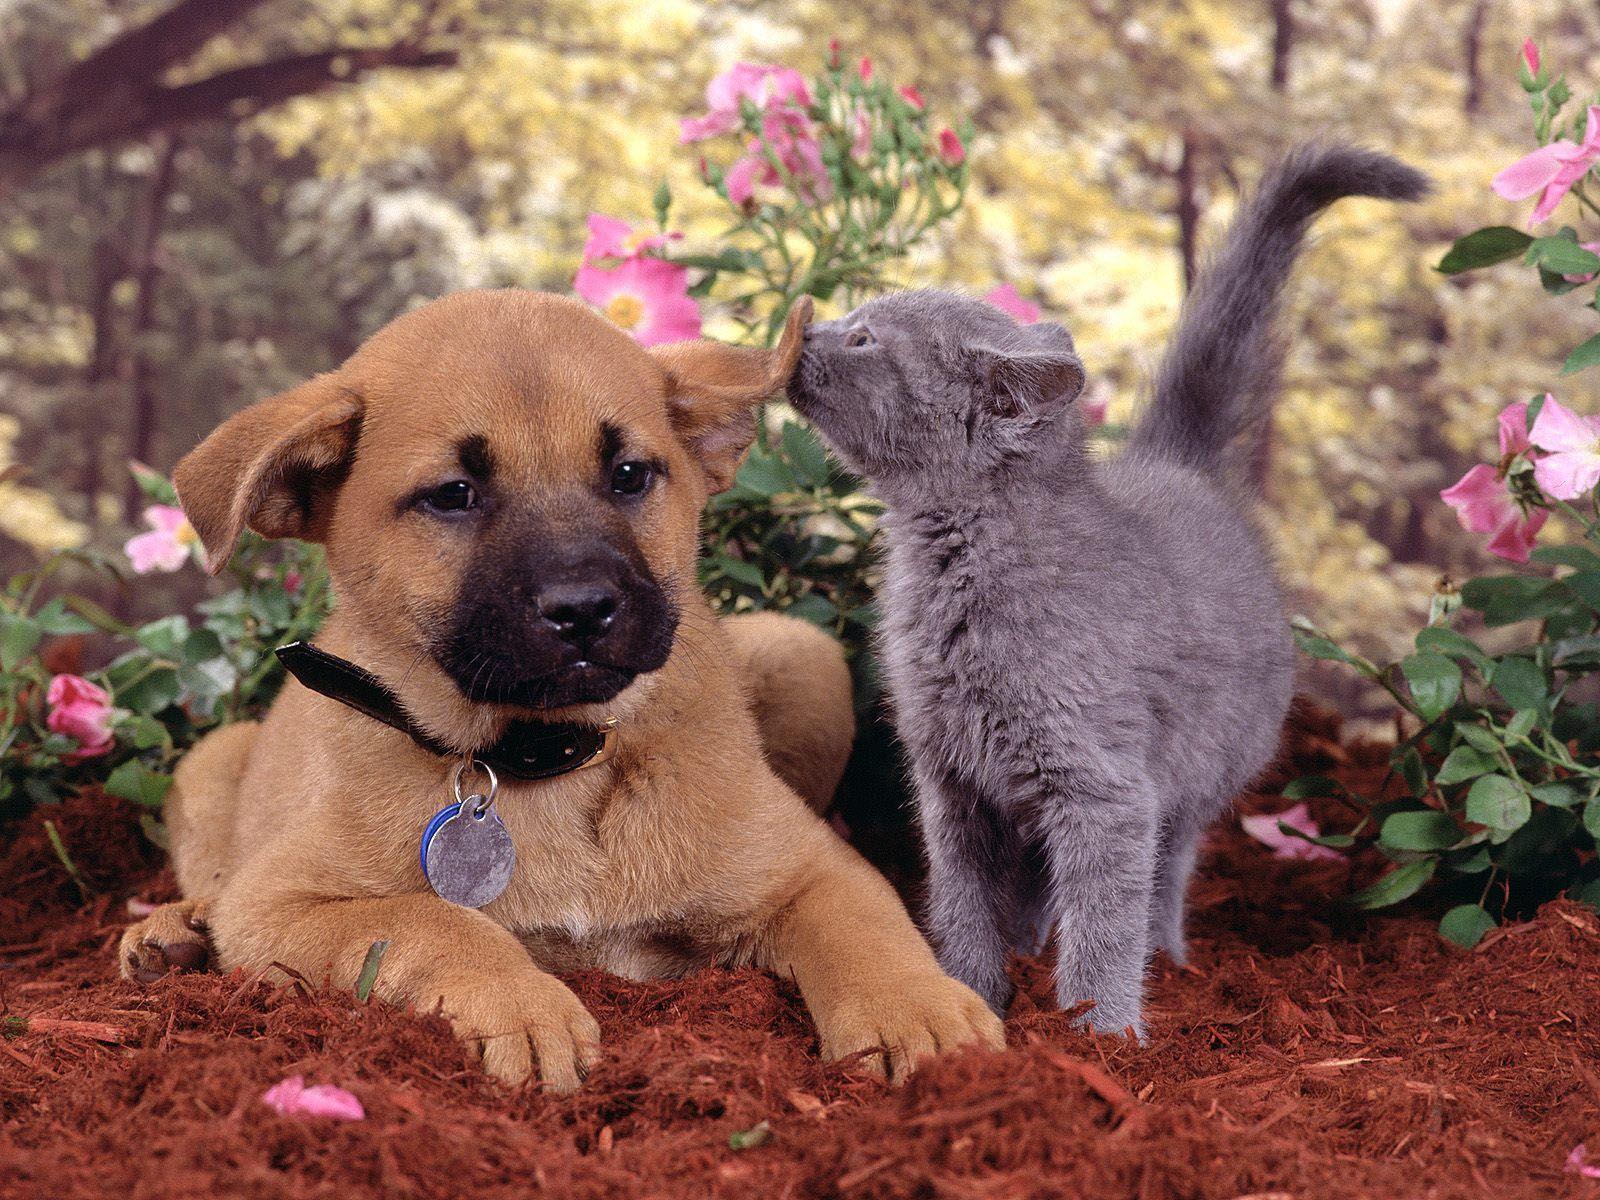 Wallpaper For > Cute Dog And Cat Wallpaper